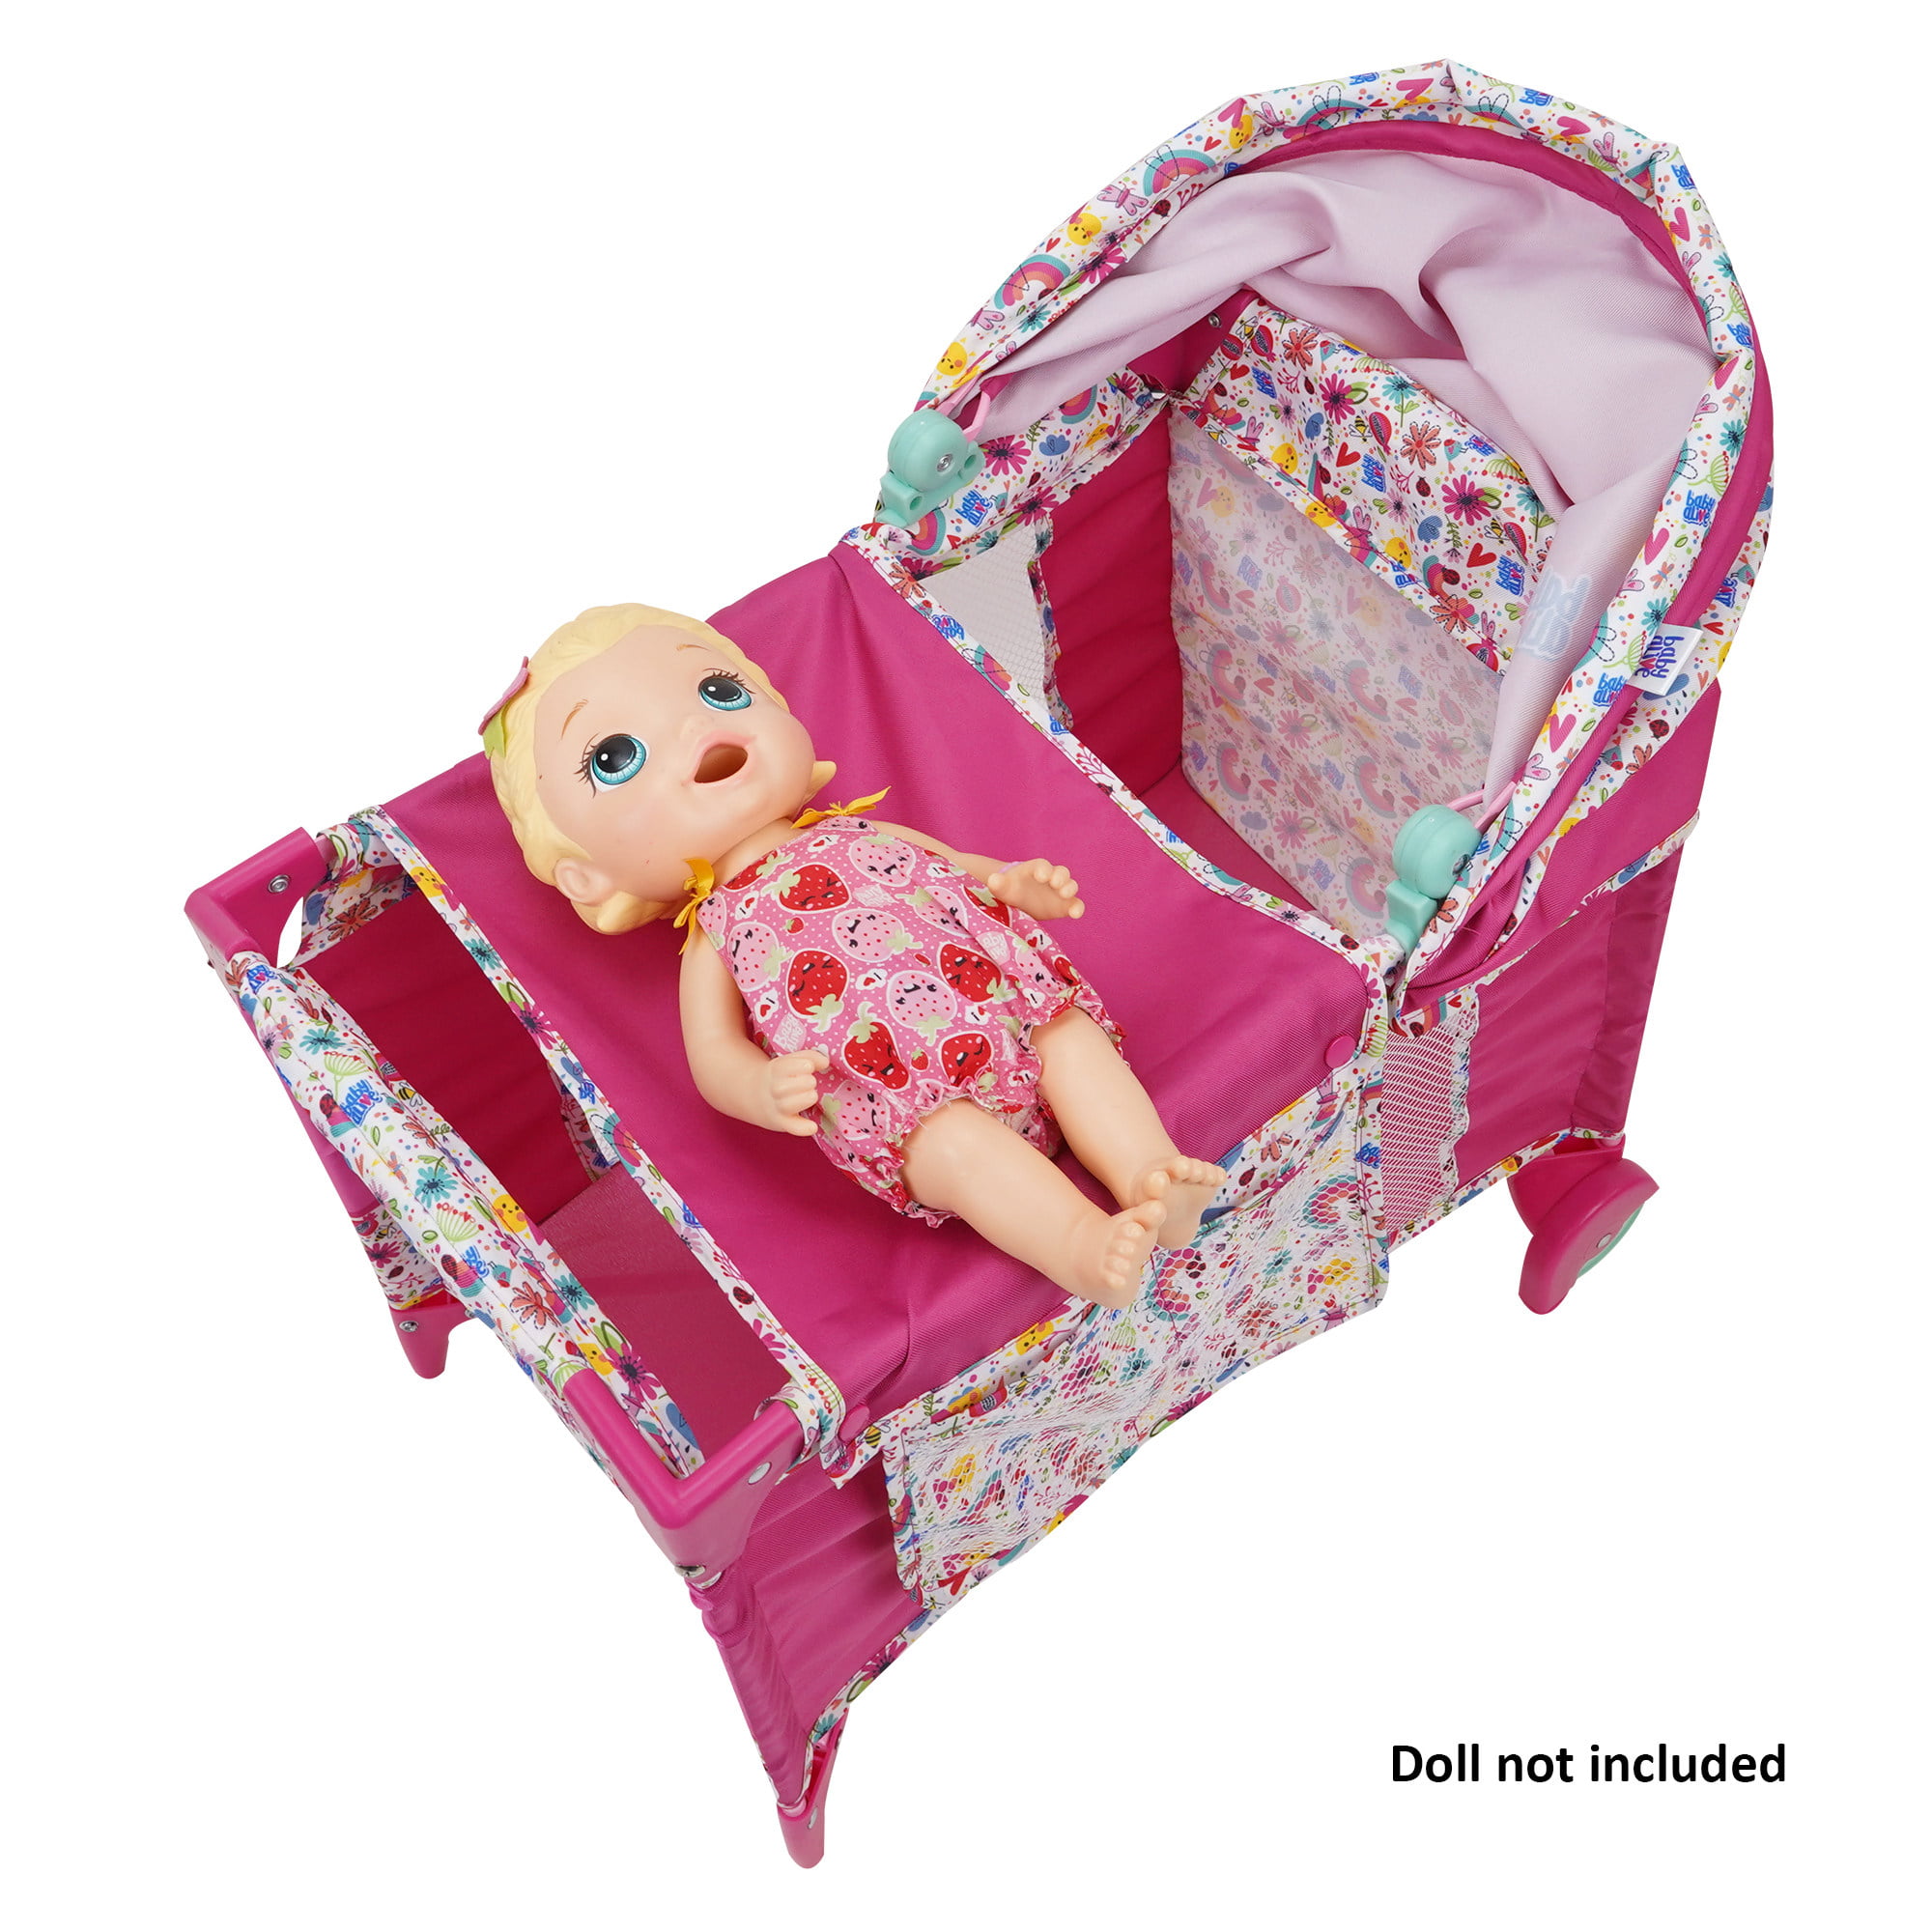 Baby Alive: Doll Stroller - Pink & Rainbow - Fits Dolls Up to 24,  Retractable Canopy, Safety Harness for Baby Doll, Two-Toned Handle &  Wheels